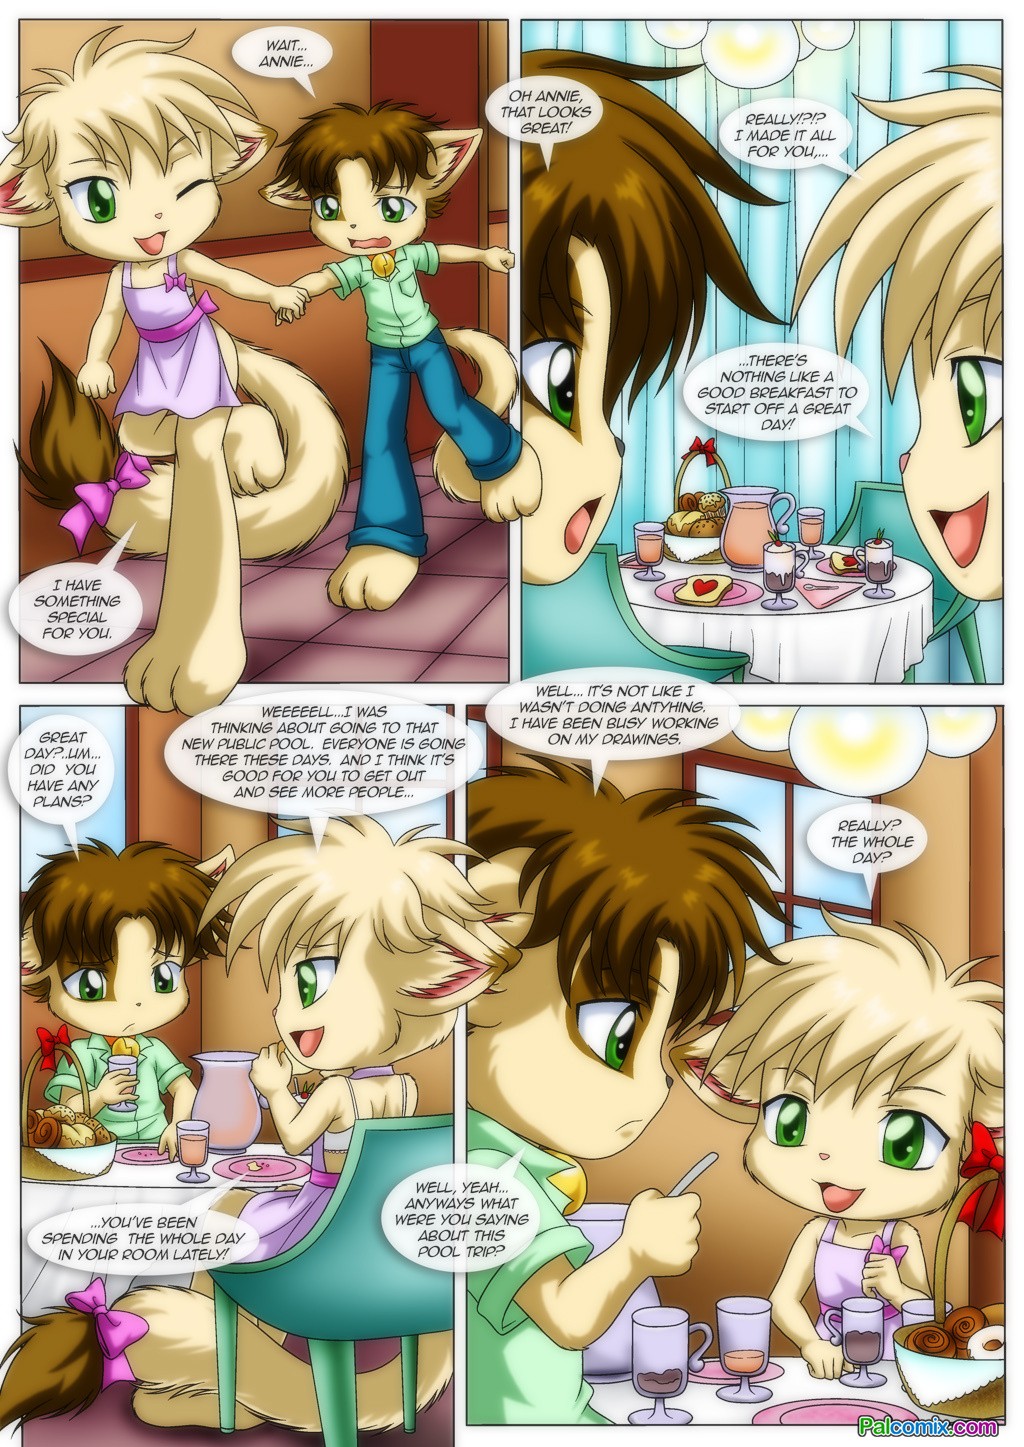 Little Tails 4: Cherry Blossom Girl porn comic picture 7